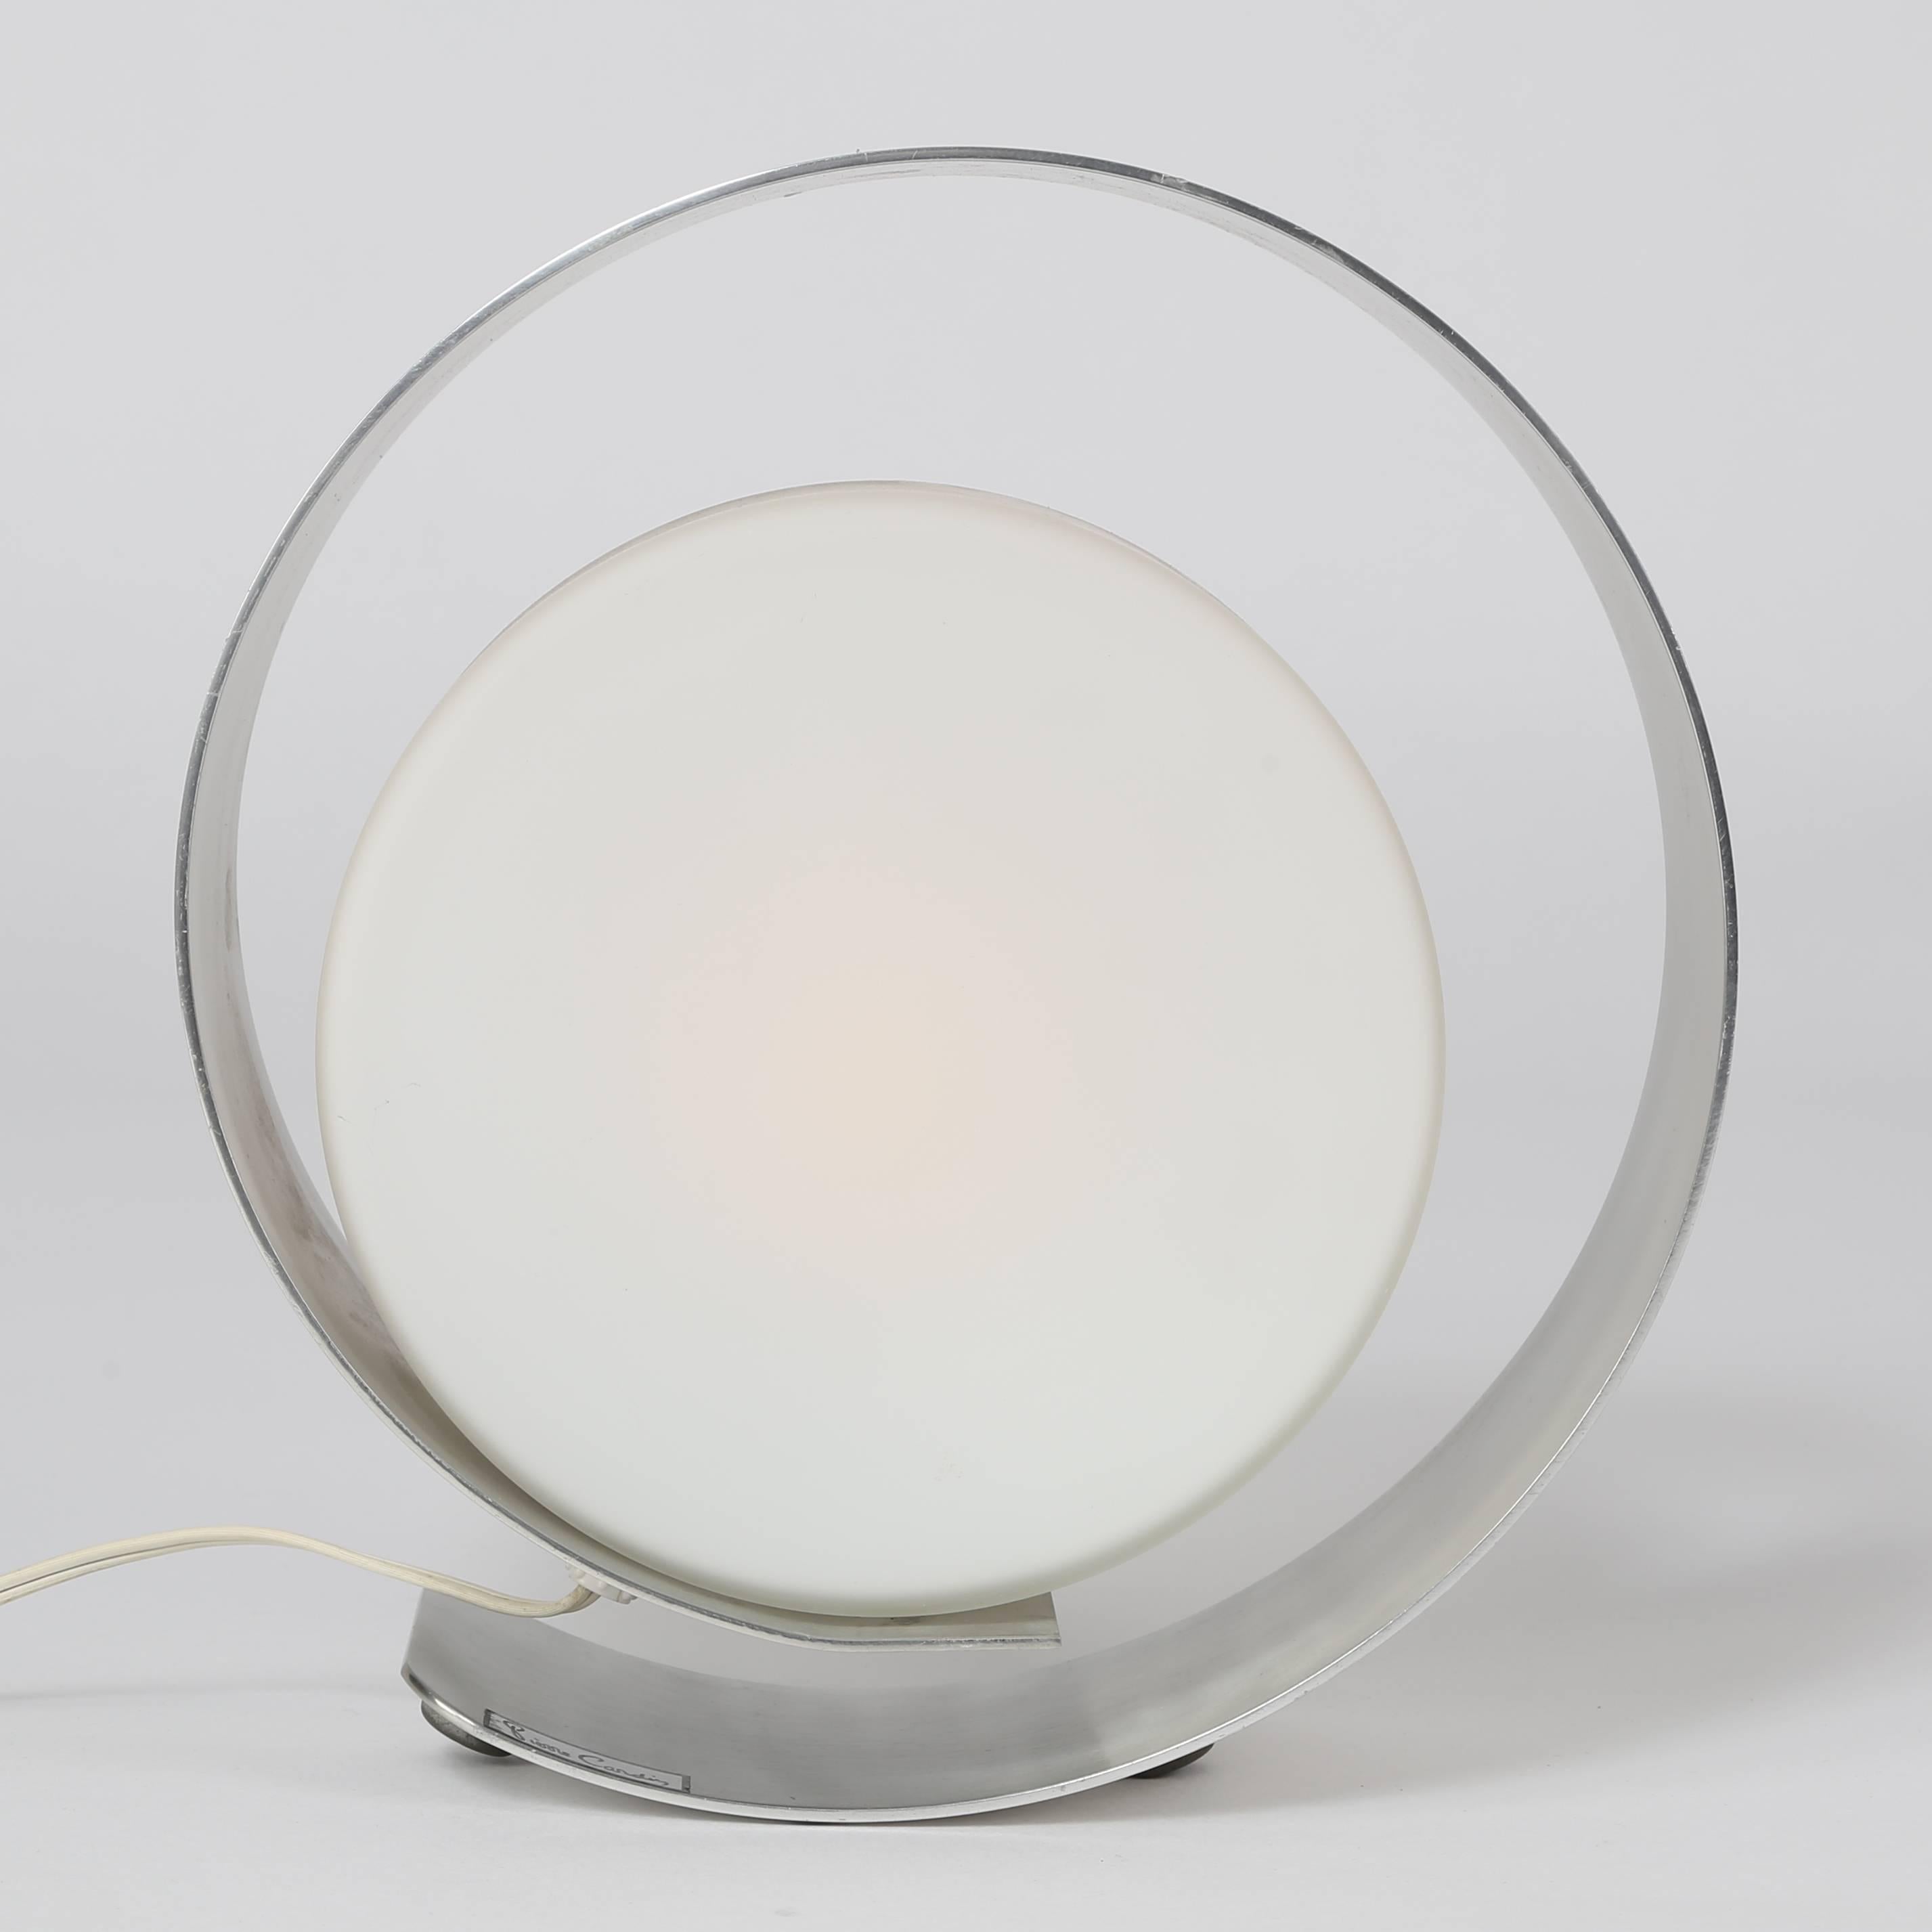 Stylish 1970s accent lamp designed by legendary fashion designer Pierre Cardin for Lumico. Frosted glass disc surrounded and supported by a circular brushed-aluminum frame. New high-low dimmer switch on cord. Takes a single standard-base bulb.